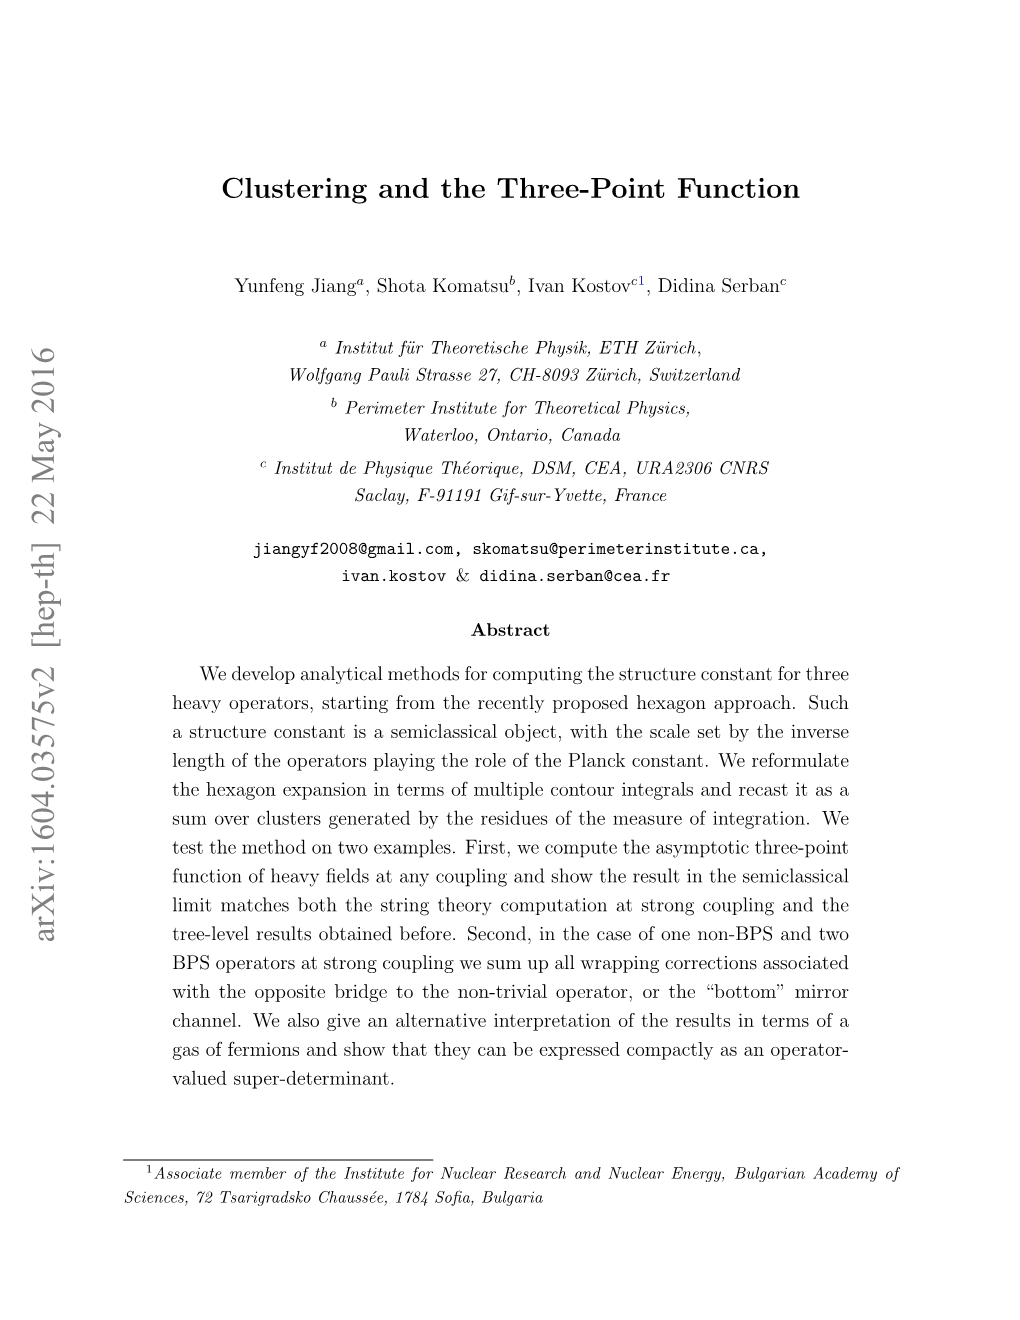 Clustering and the Three-Point Function